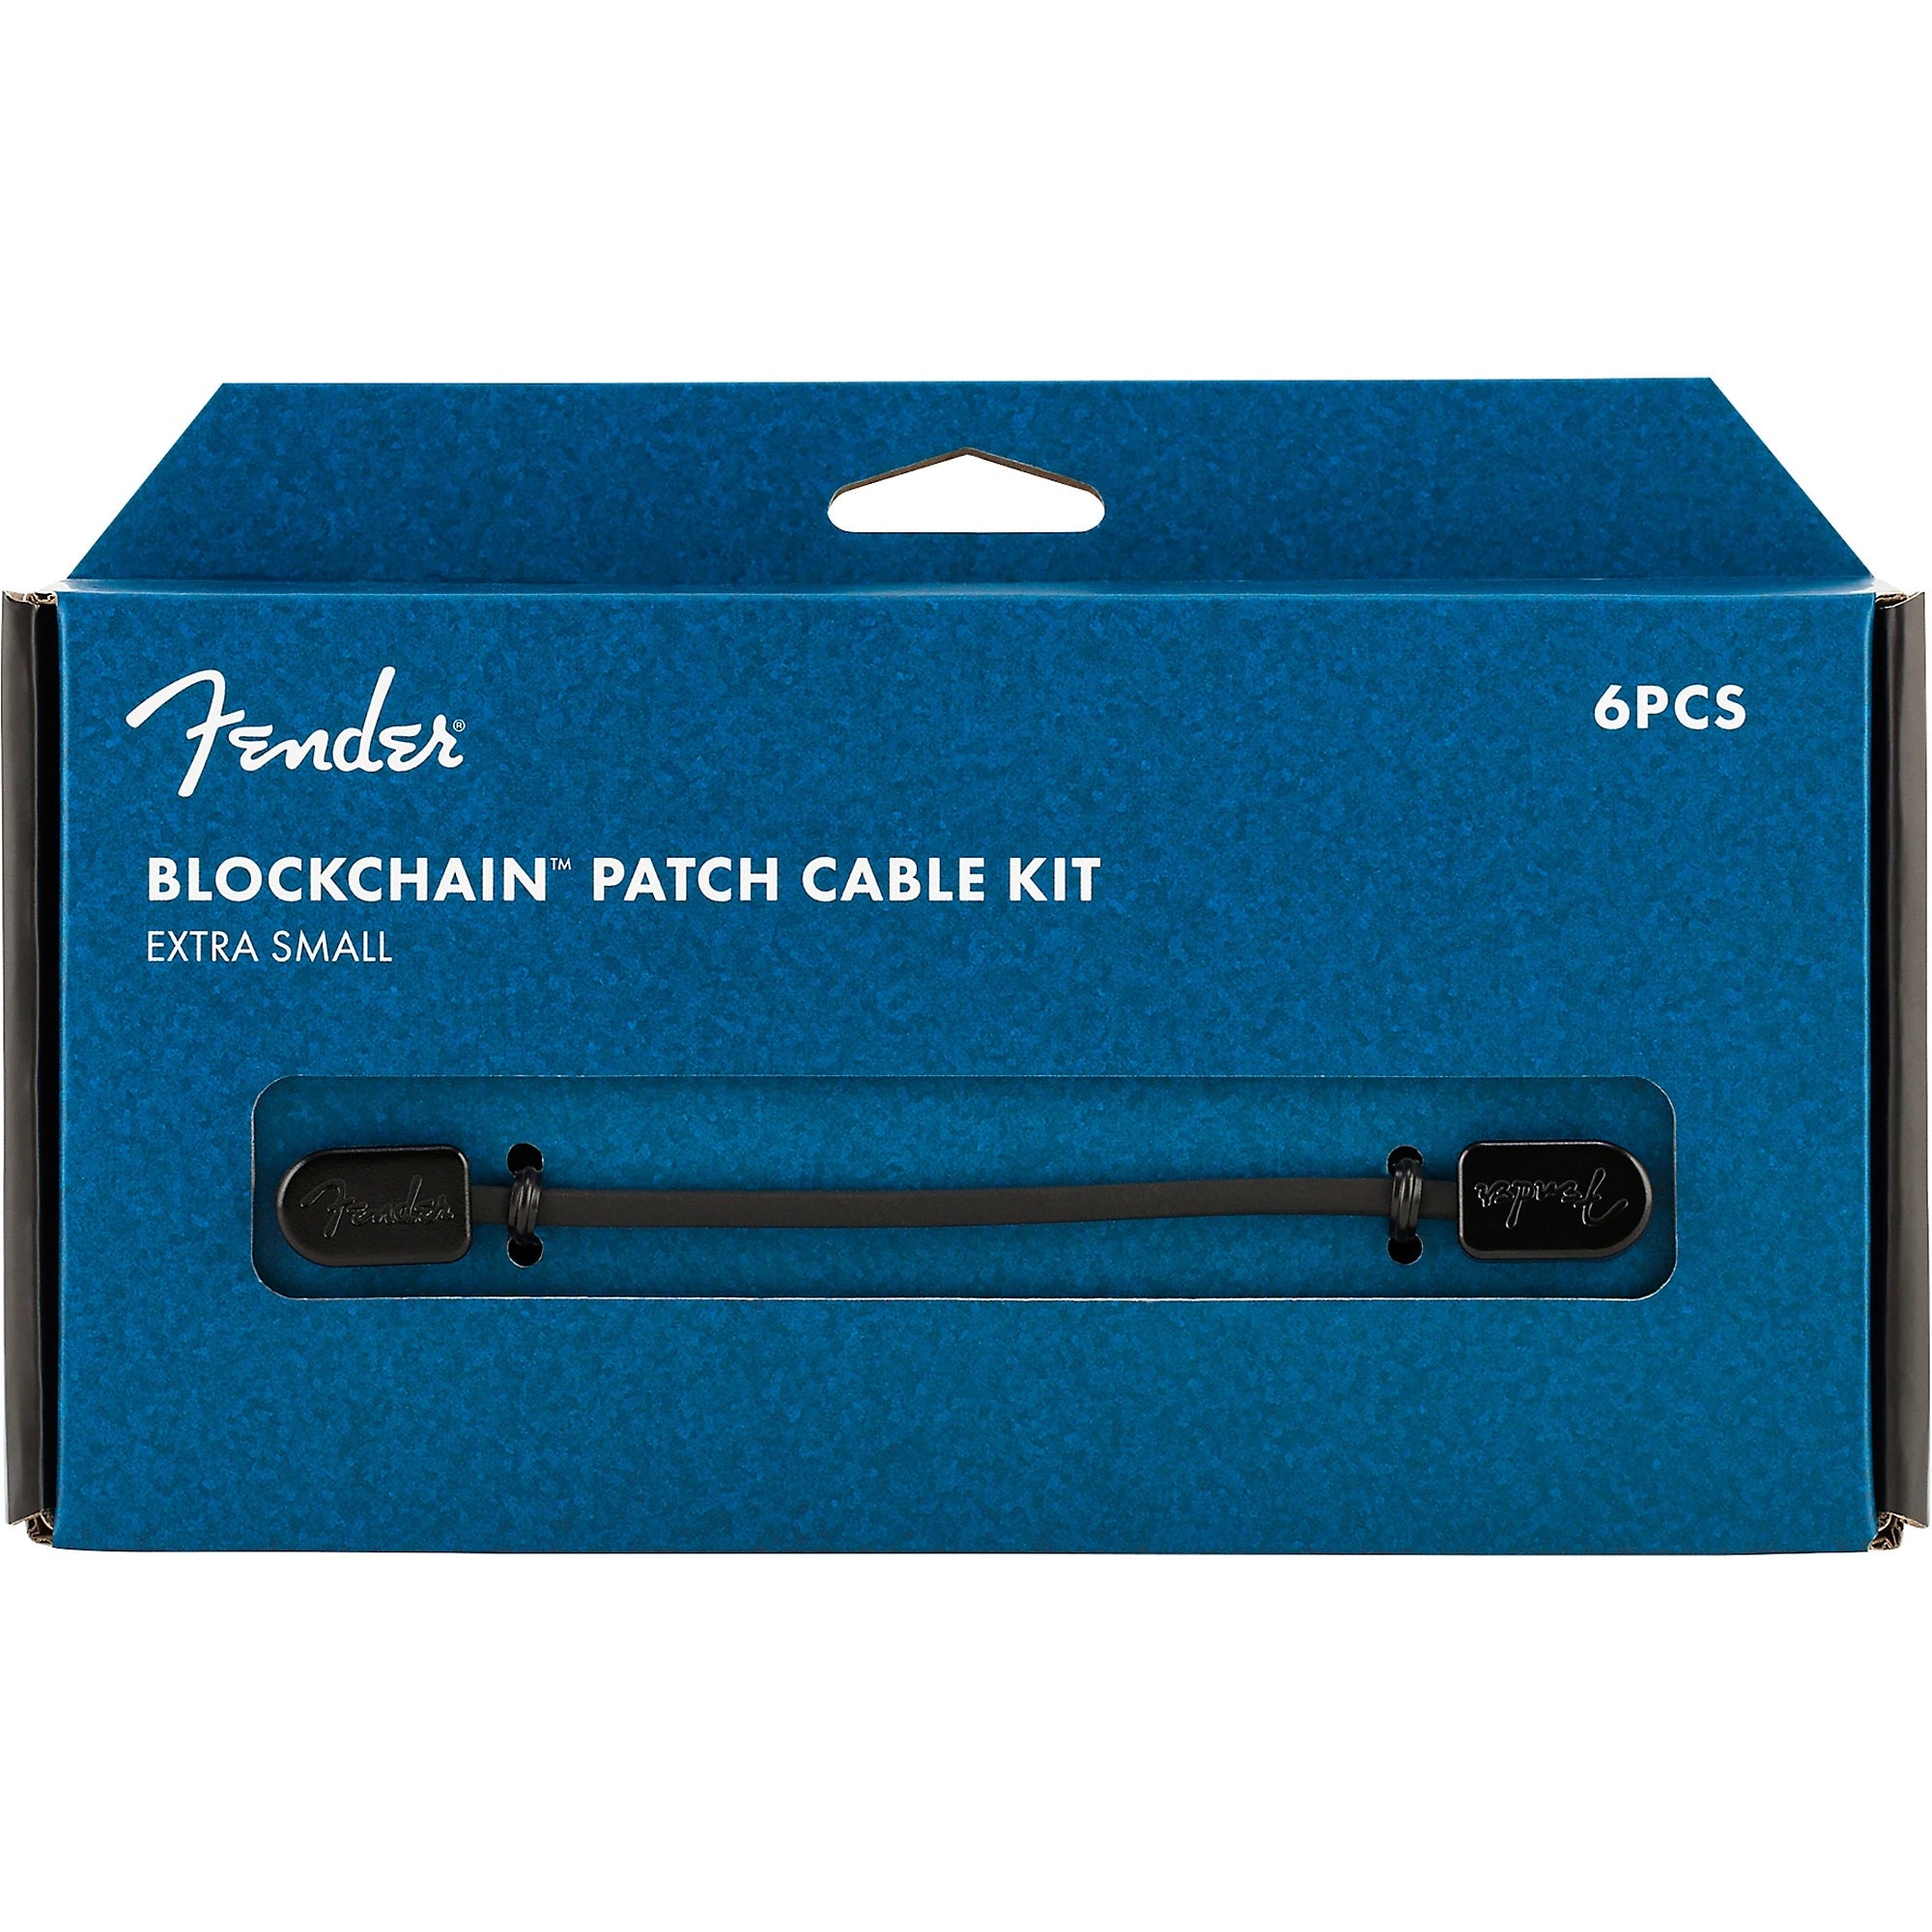 Fender Blockchain Patch Cable Kit, Extra Small